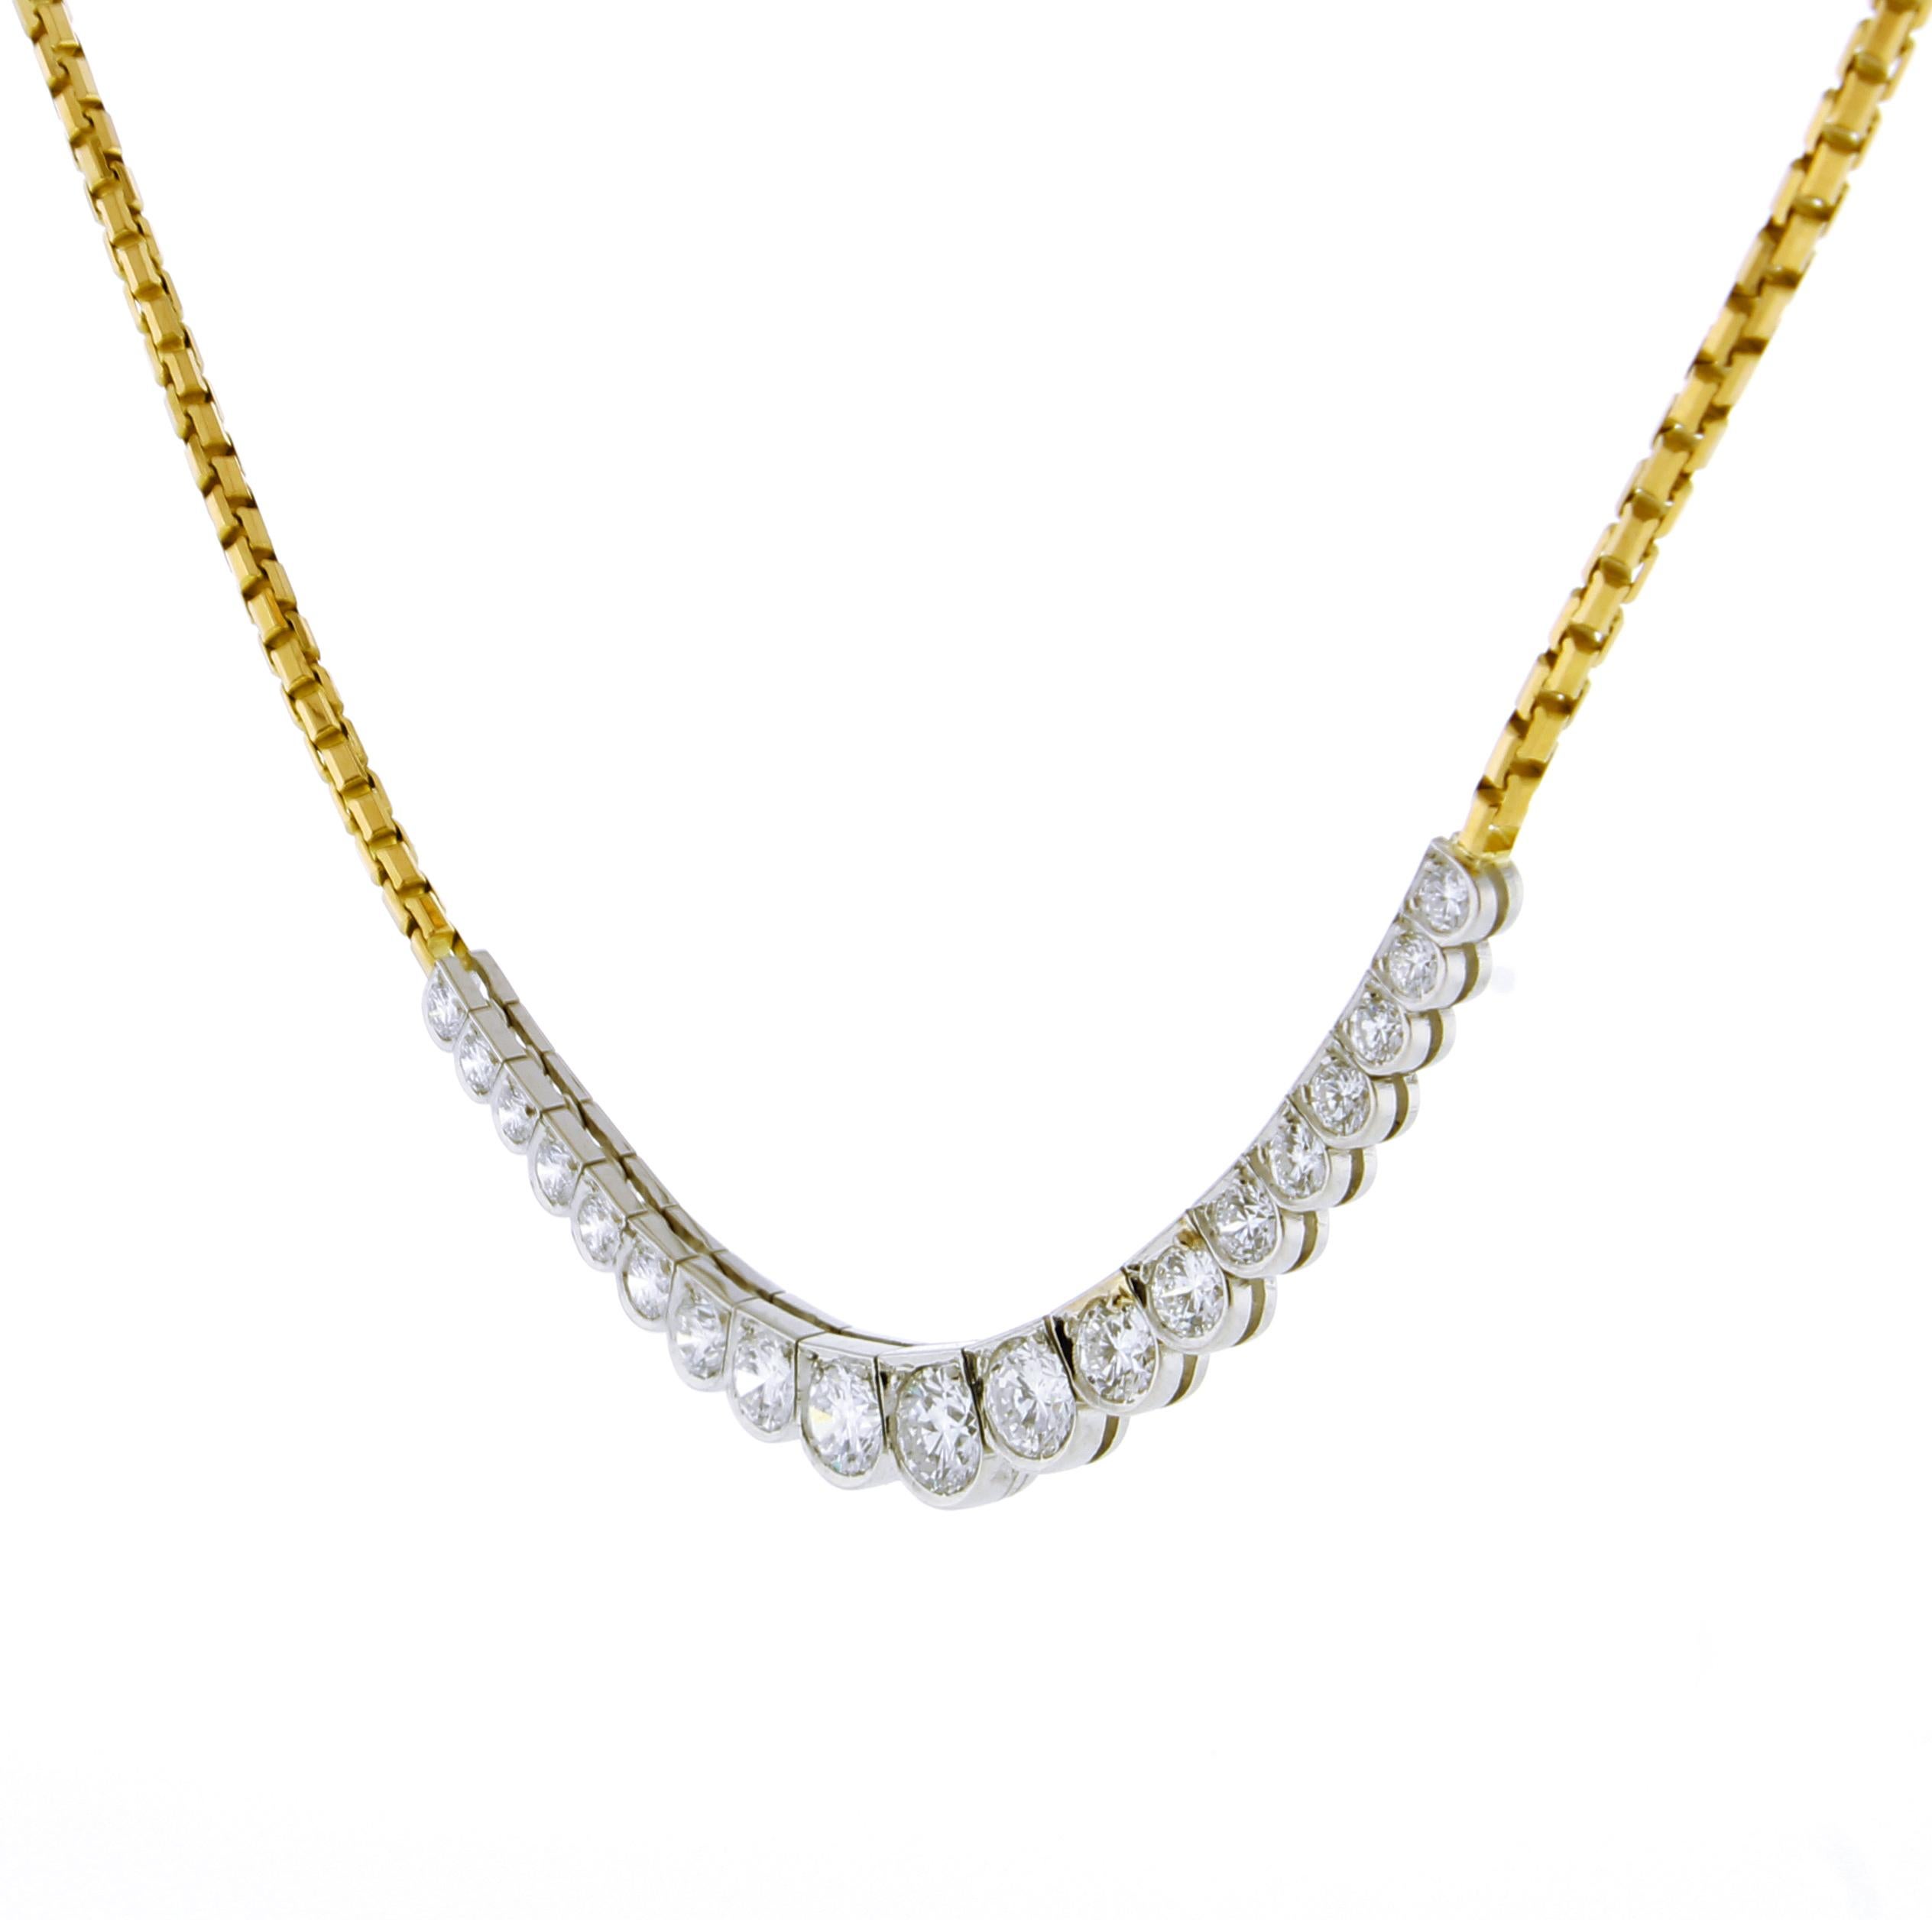 From Oscar Heyman, a diamond and 18 karat gold necklace. The diamonds are sets in Oscar Heyman's signature individual platinum settings with an 18 karat gold chain. The necklace features a retractable eye ring so it may accommodate a pendant drop.
♦